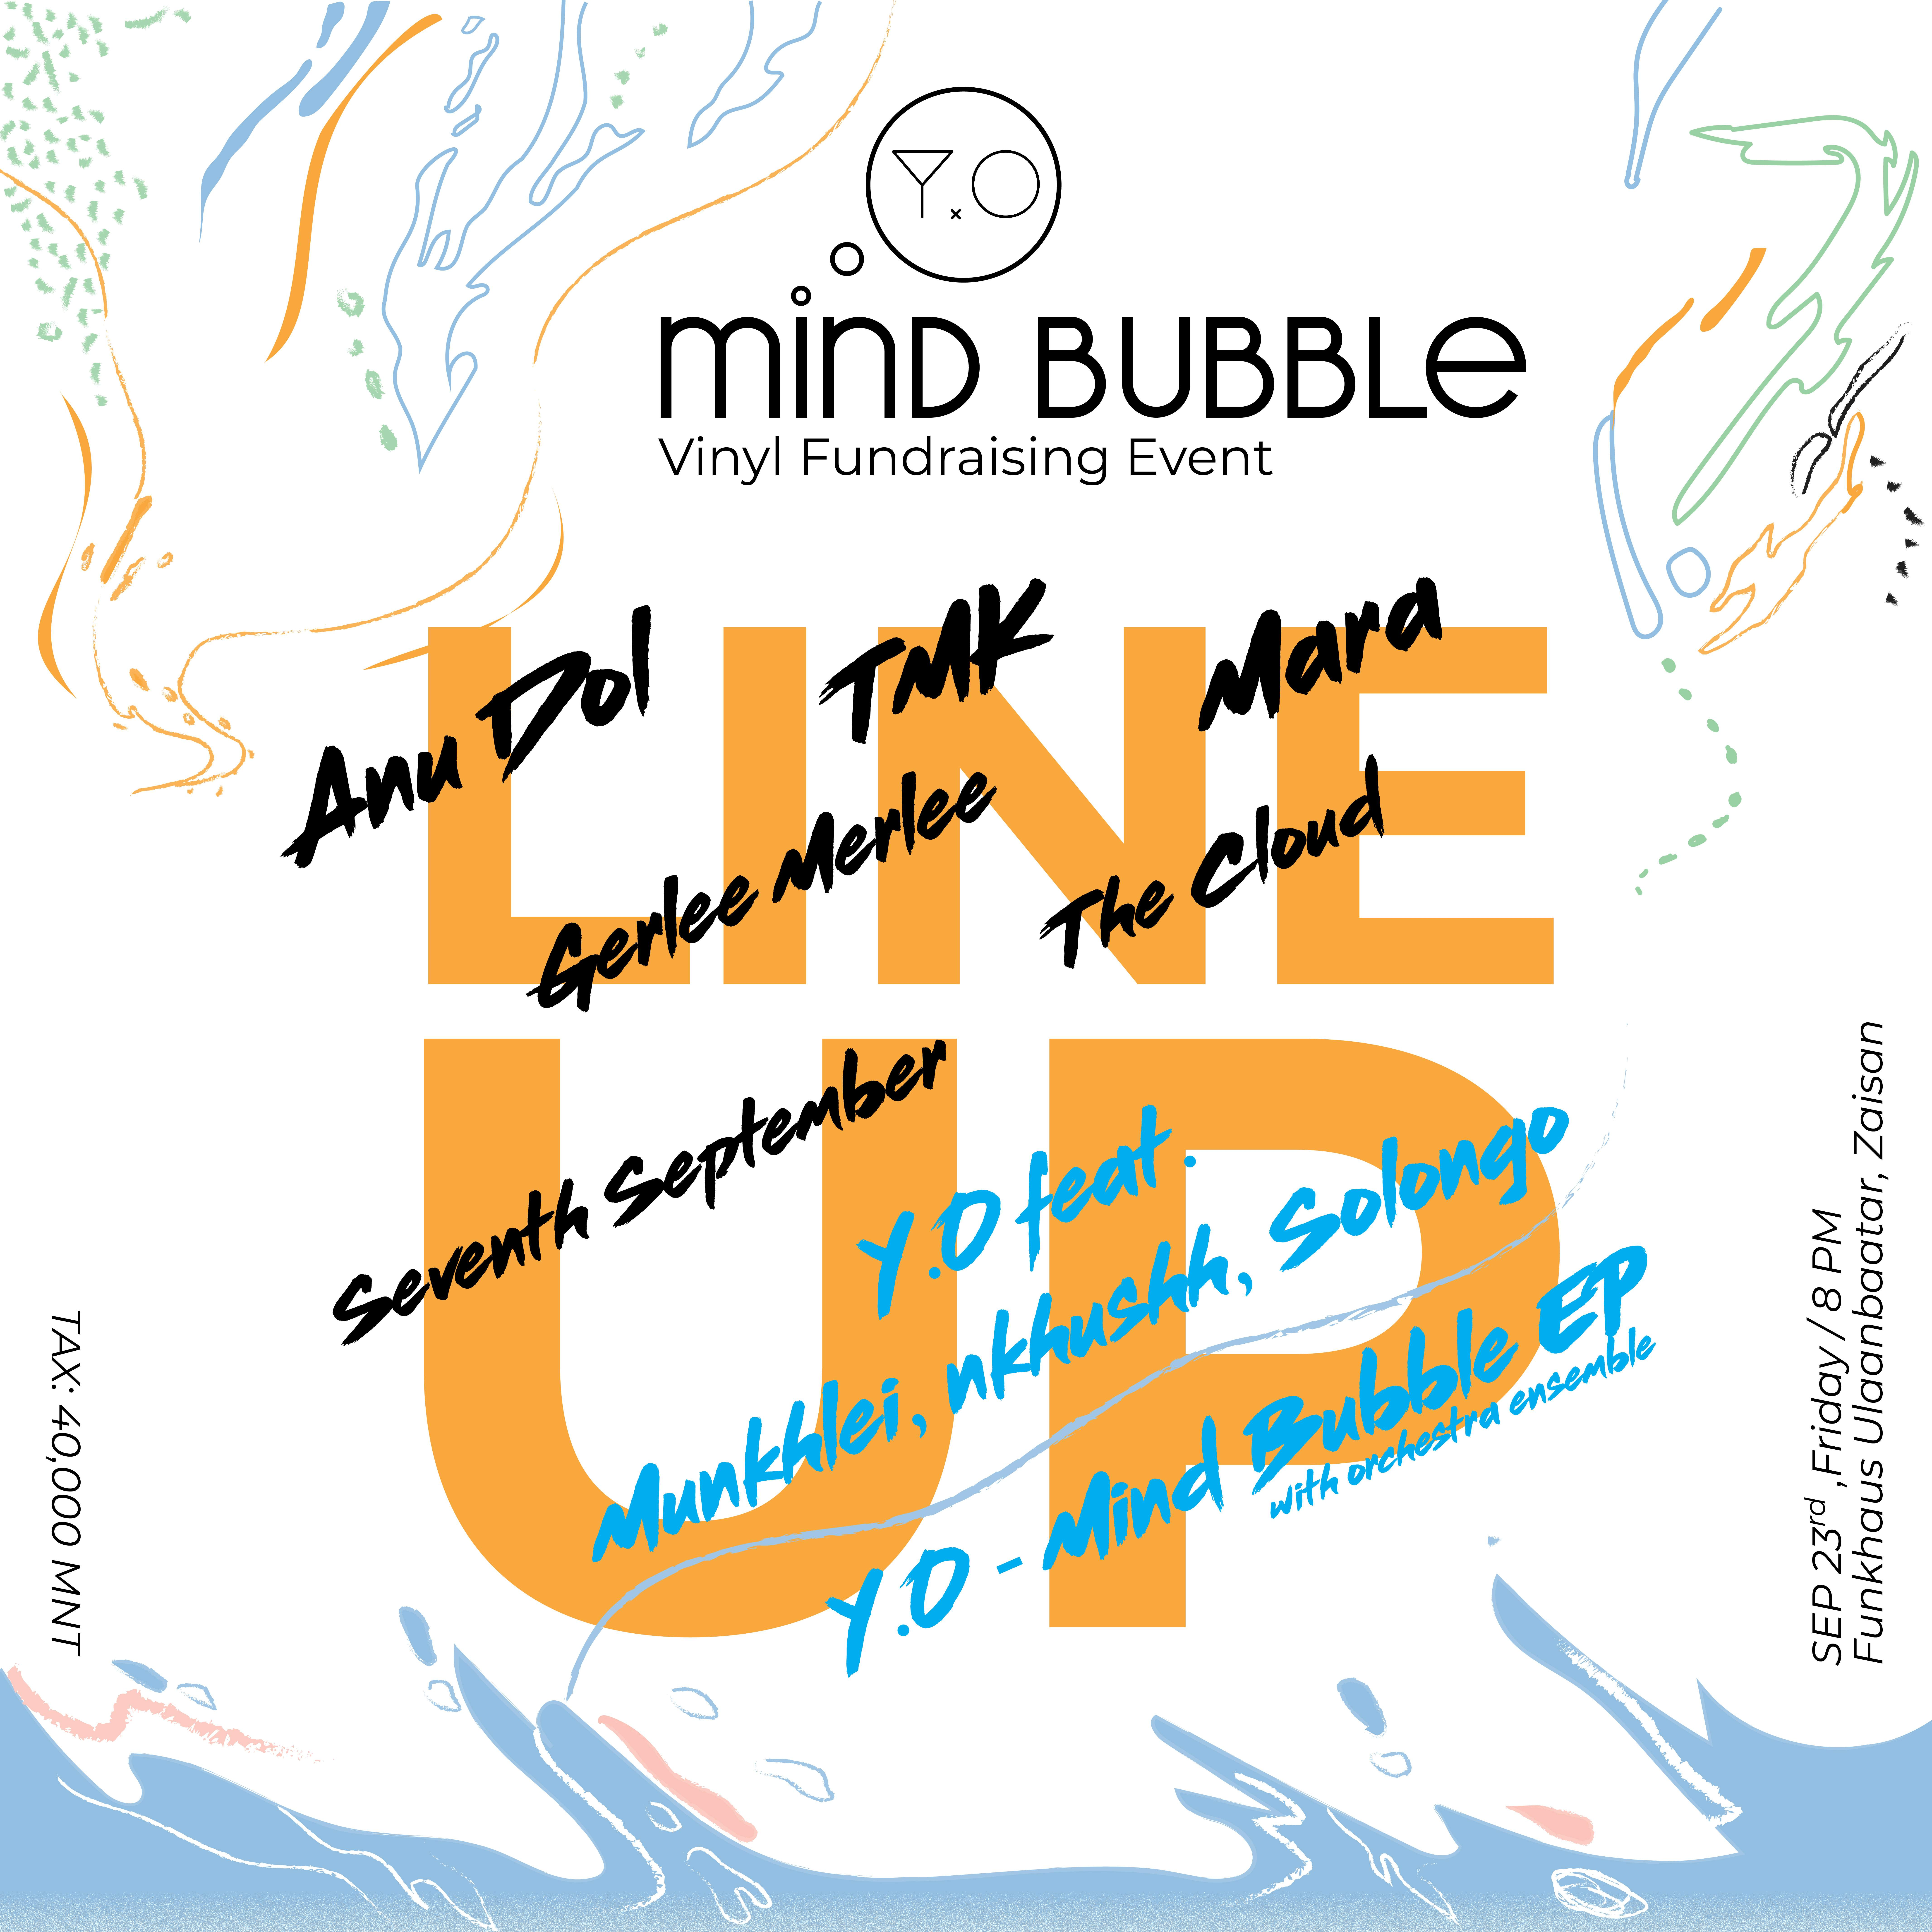 Y.O - Mind Bubble EP (Vinyl Fundraising Event) - フライヤー裏